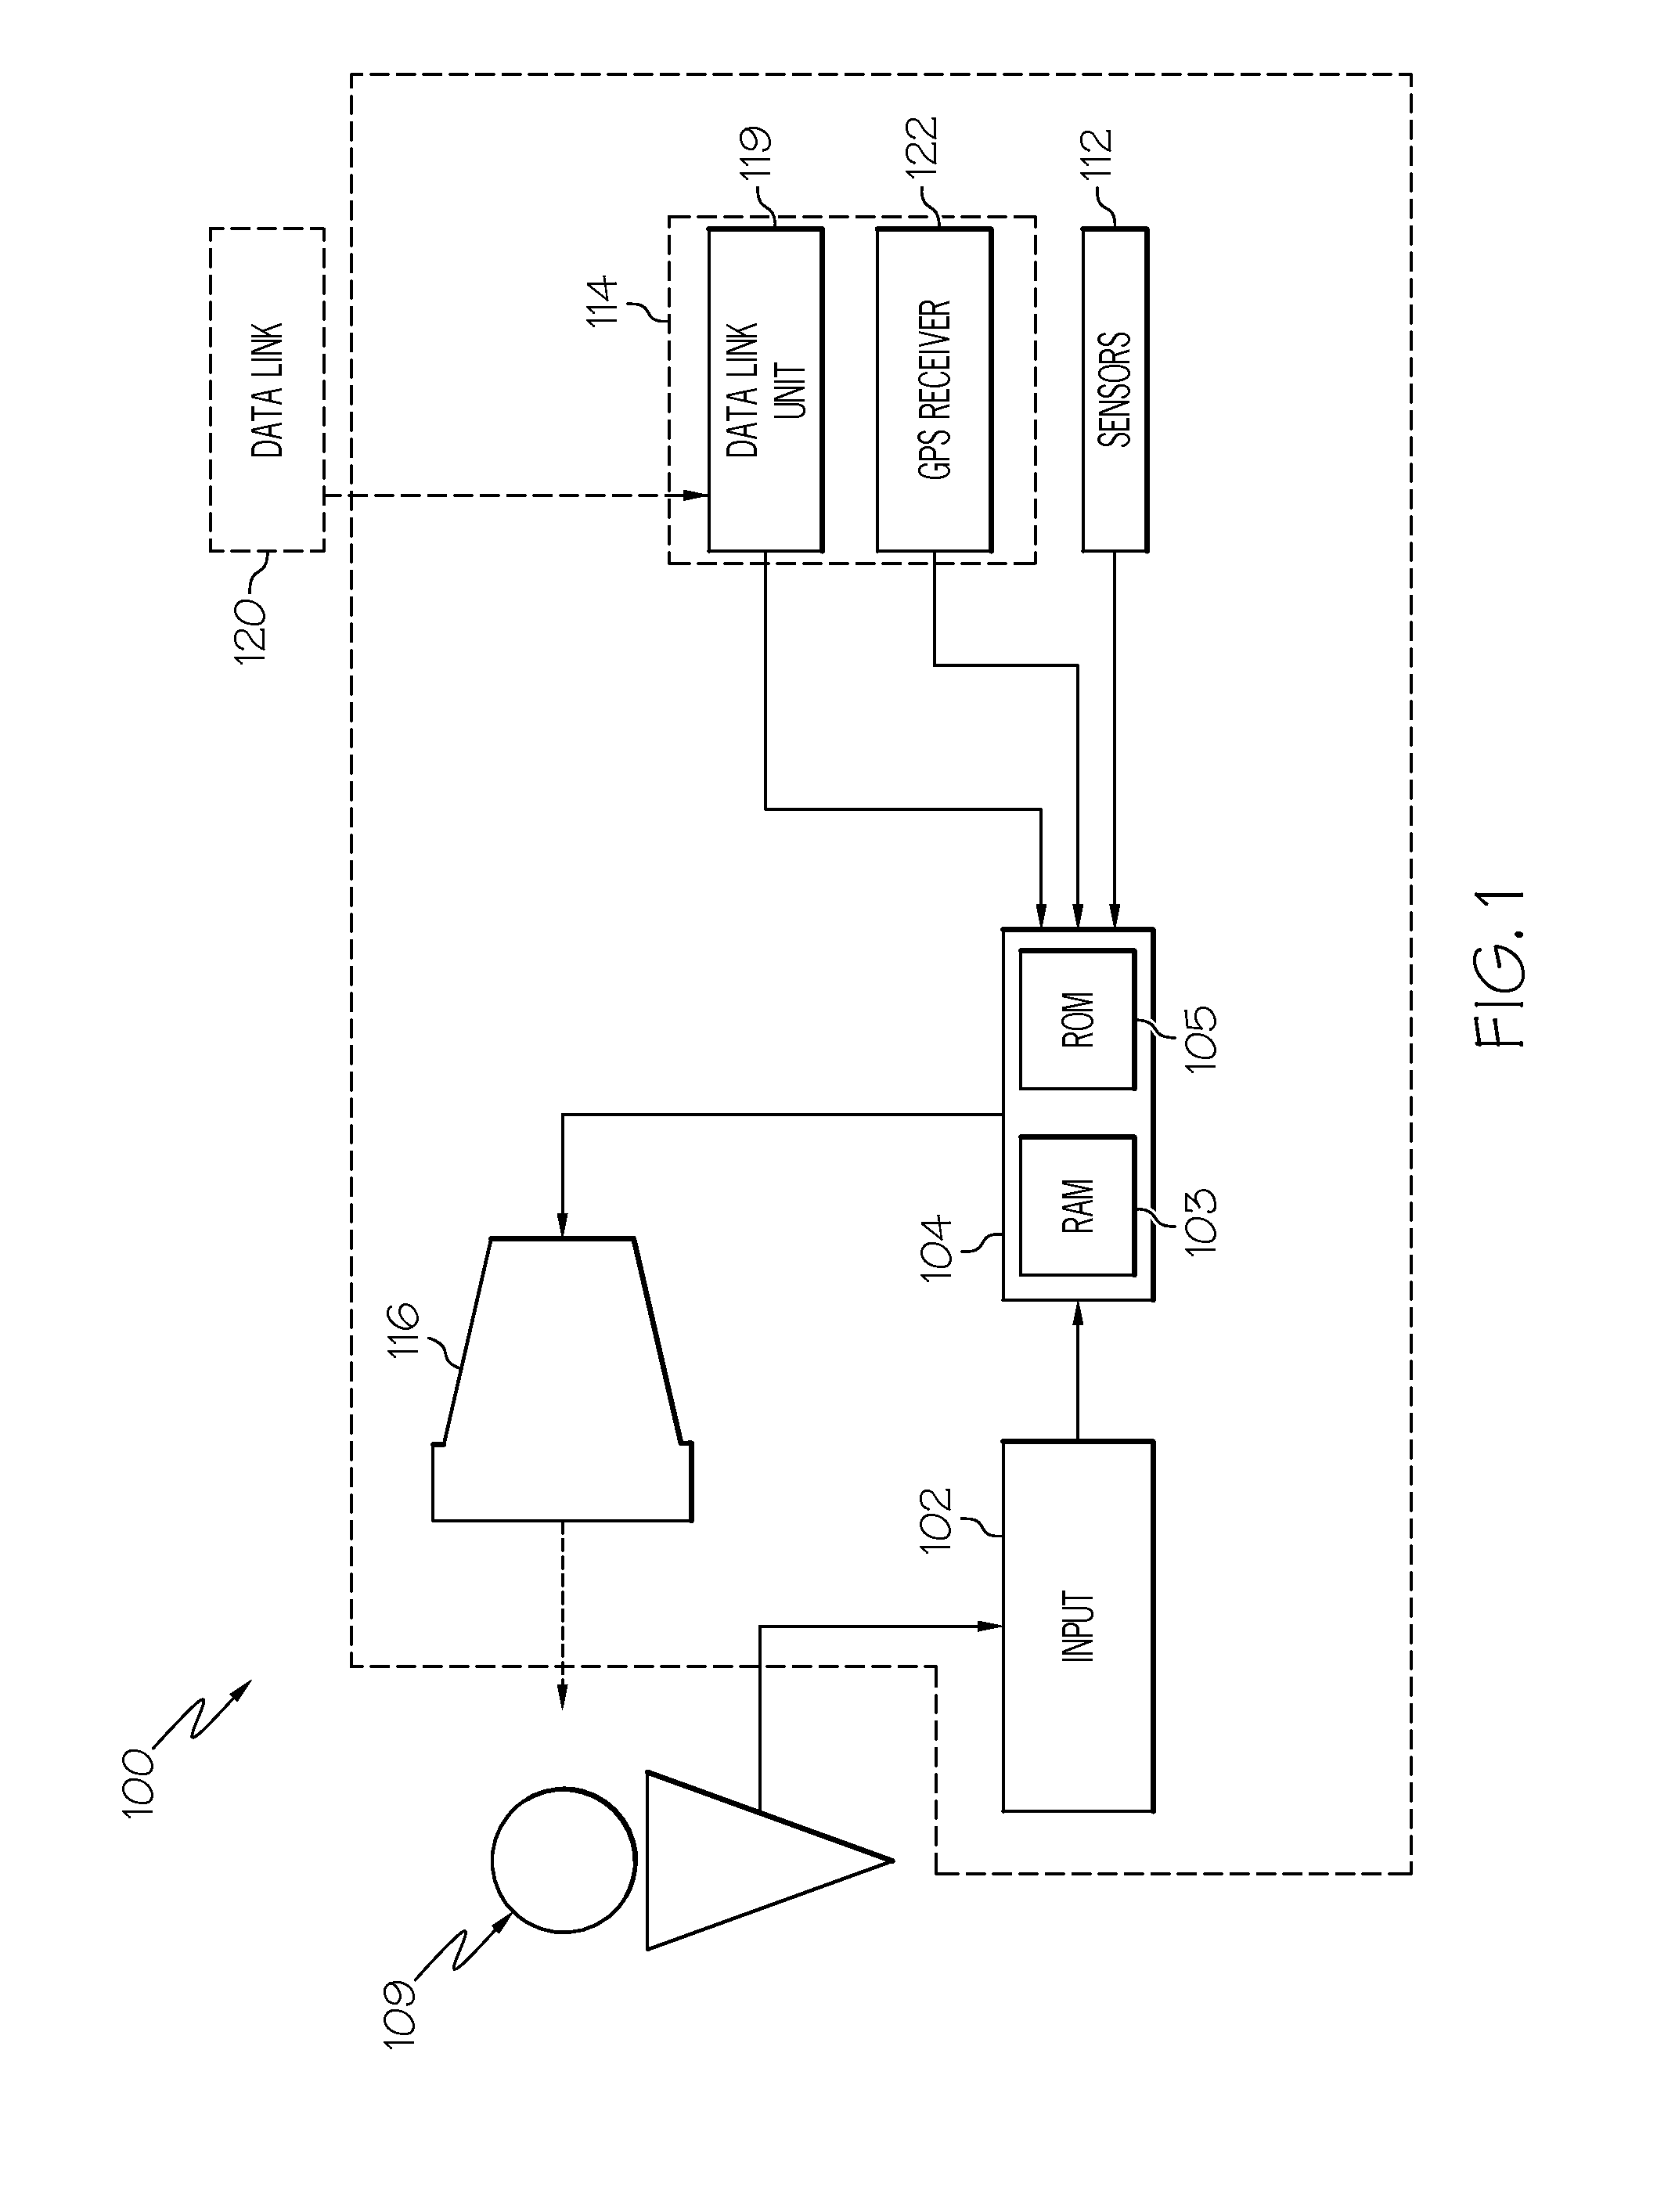 System and method for processing and displaying wake turbulence